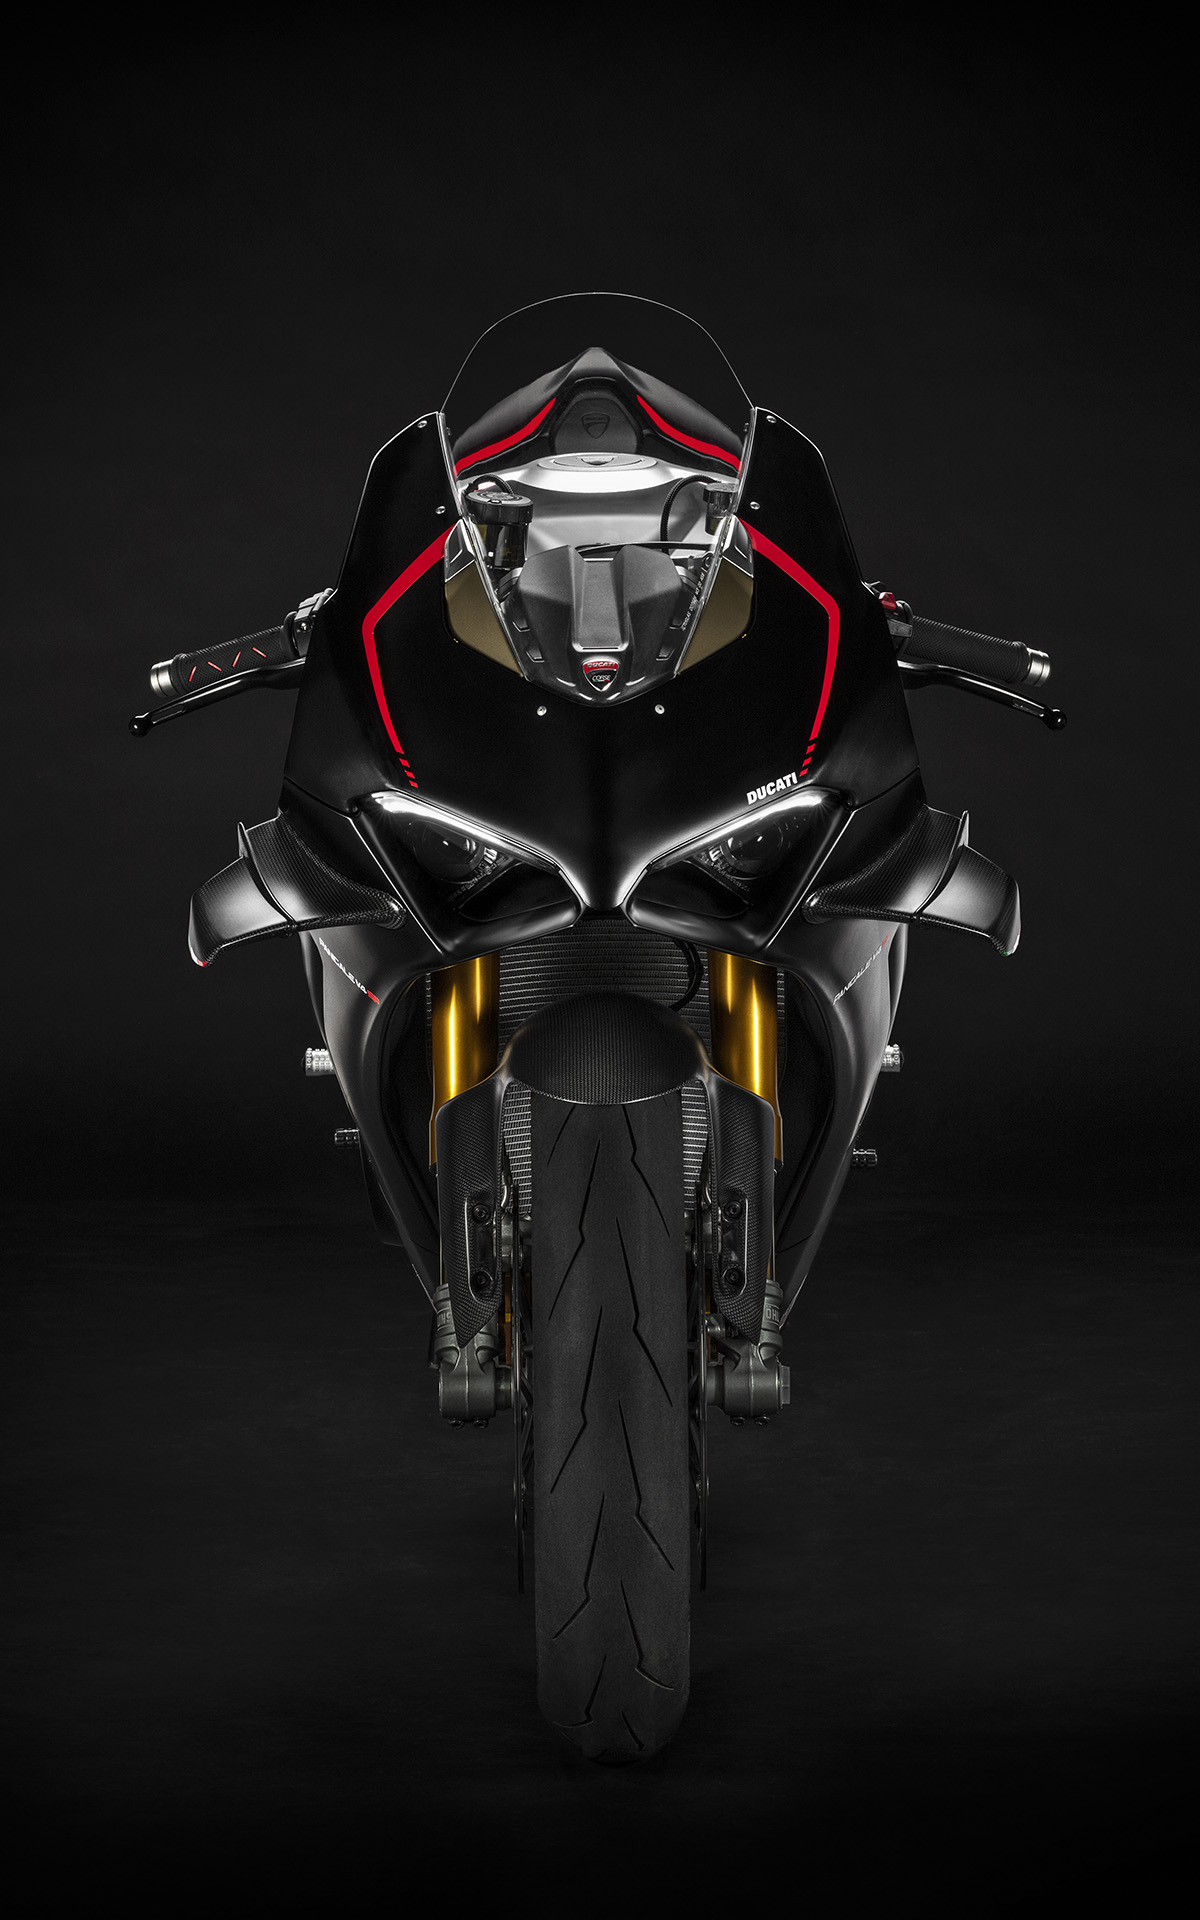 Ducati Panigale V4 SP frontal fx